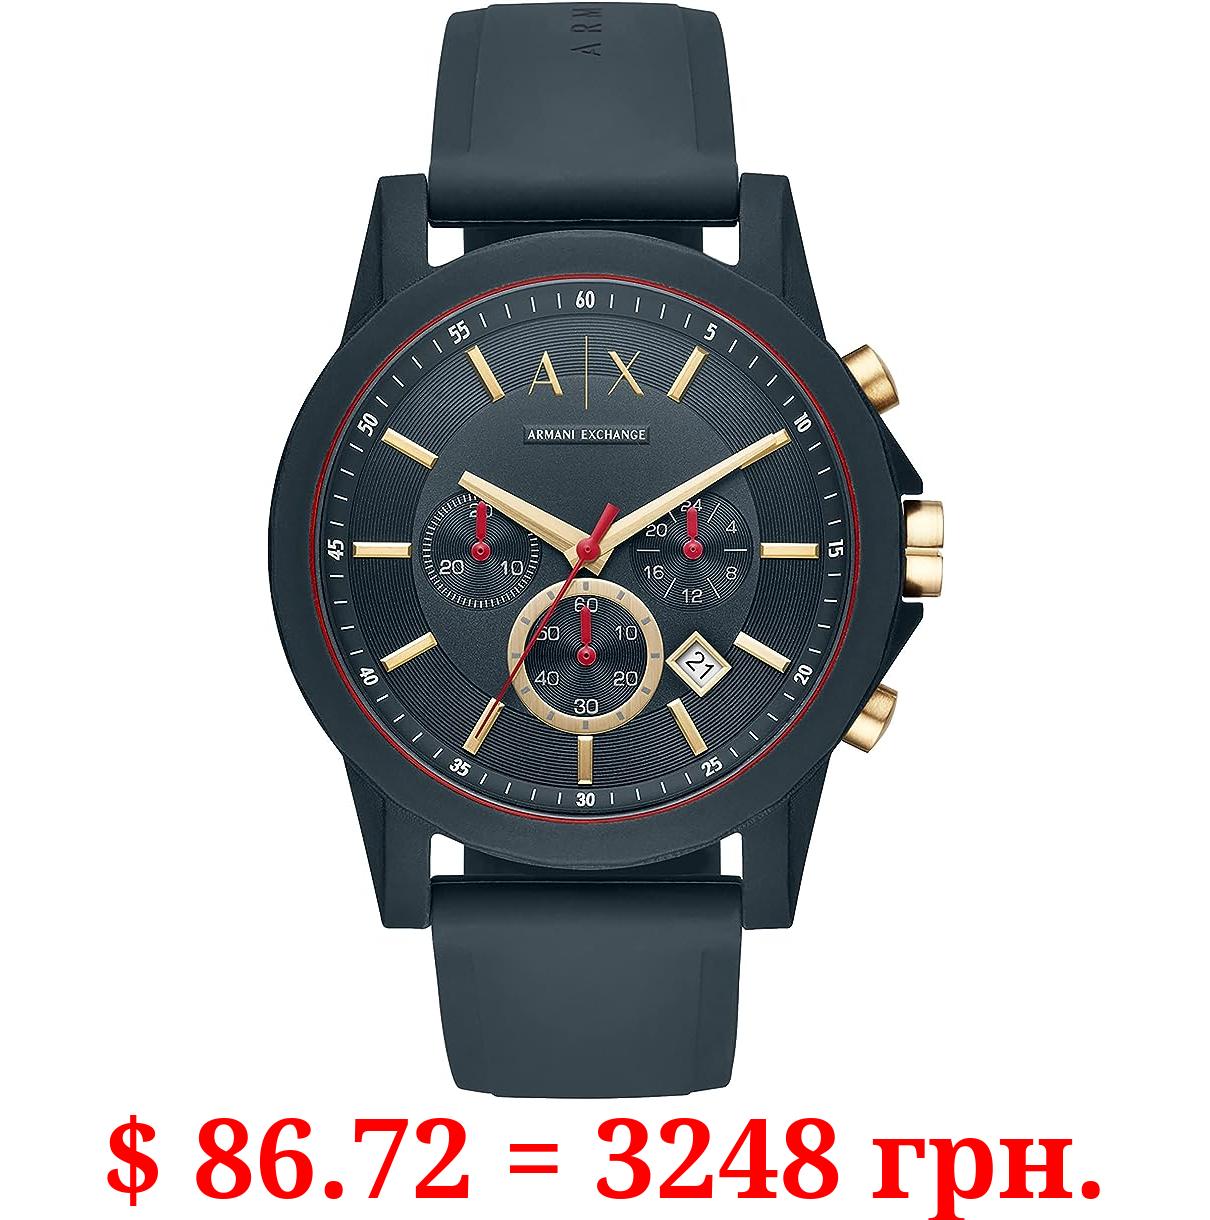 Armani Exchange Men's Chronograph Dress Watch with Leather, Steel or Silicone Band